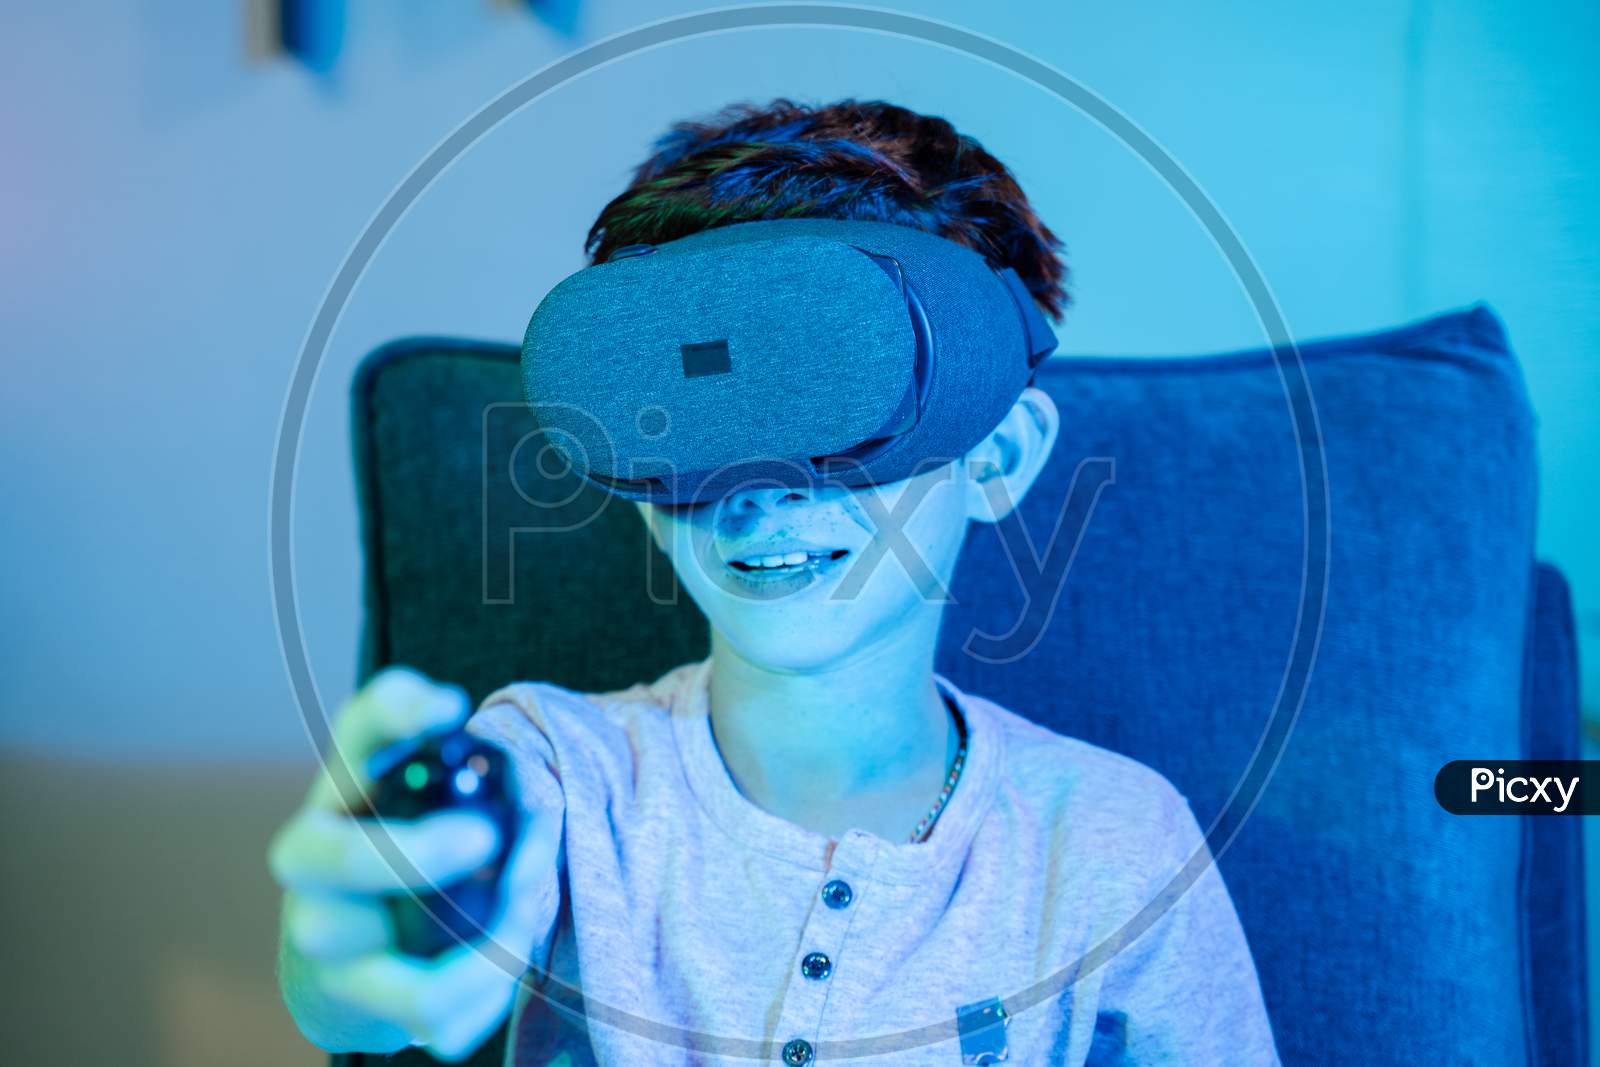 Young Kid Playing Game By Wearing Vr Or Virtual Reality Headset And Game Pad While Sitting On Sofa Showing With Neon Light Effect.